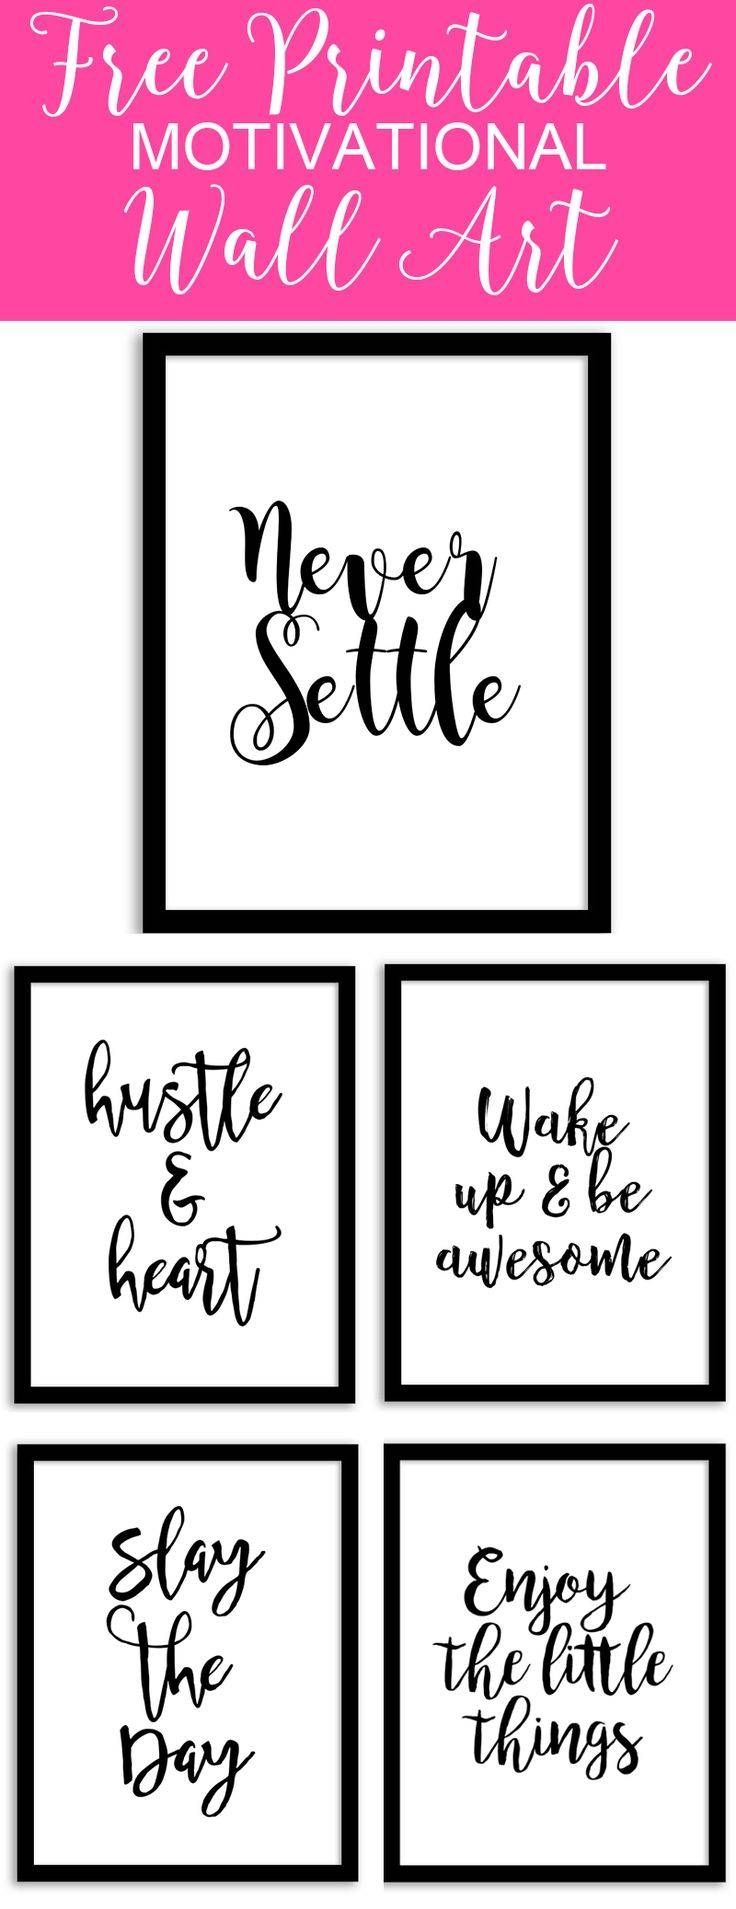 Best 25+ Office Wall Art Ideas On Pinterest | Office Wall Design With Regard To Recent Inspirational Wall Art For Office (View 8 of 20)